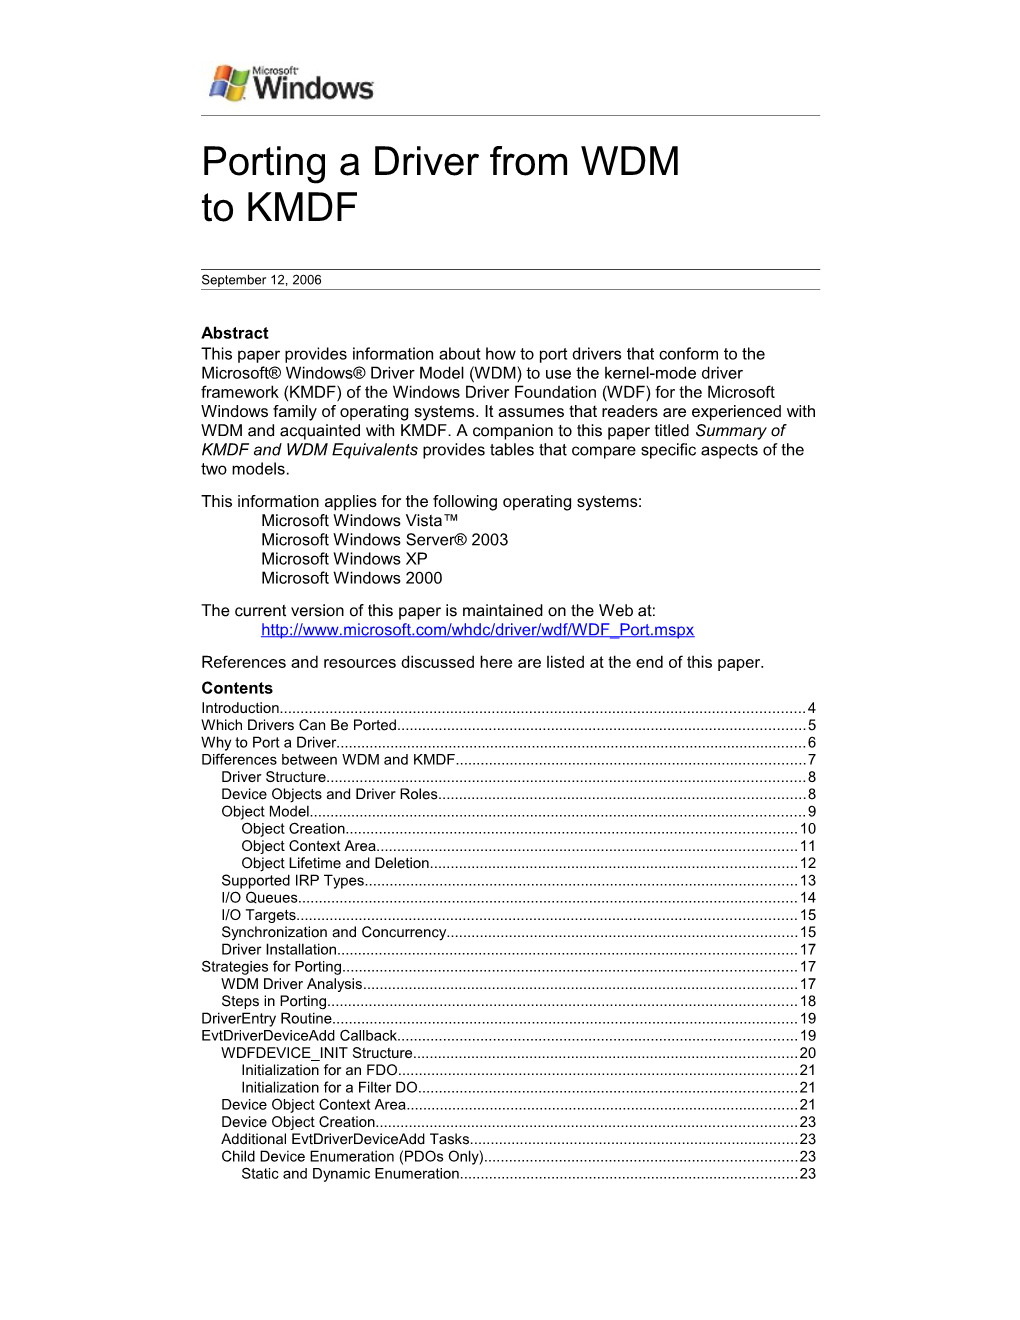 Porting a Driver from WDM to KMDF